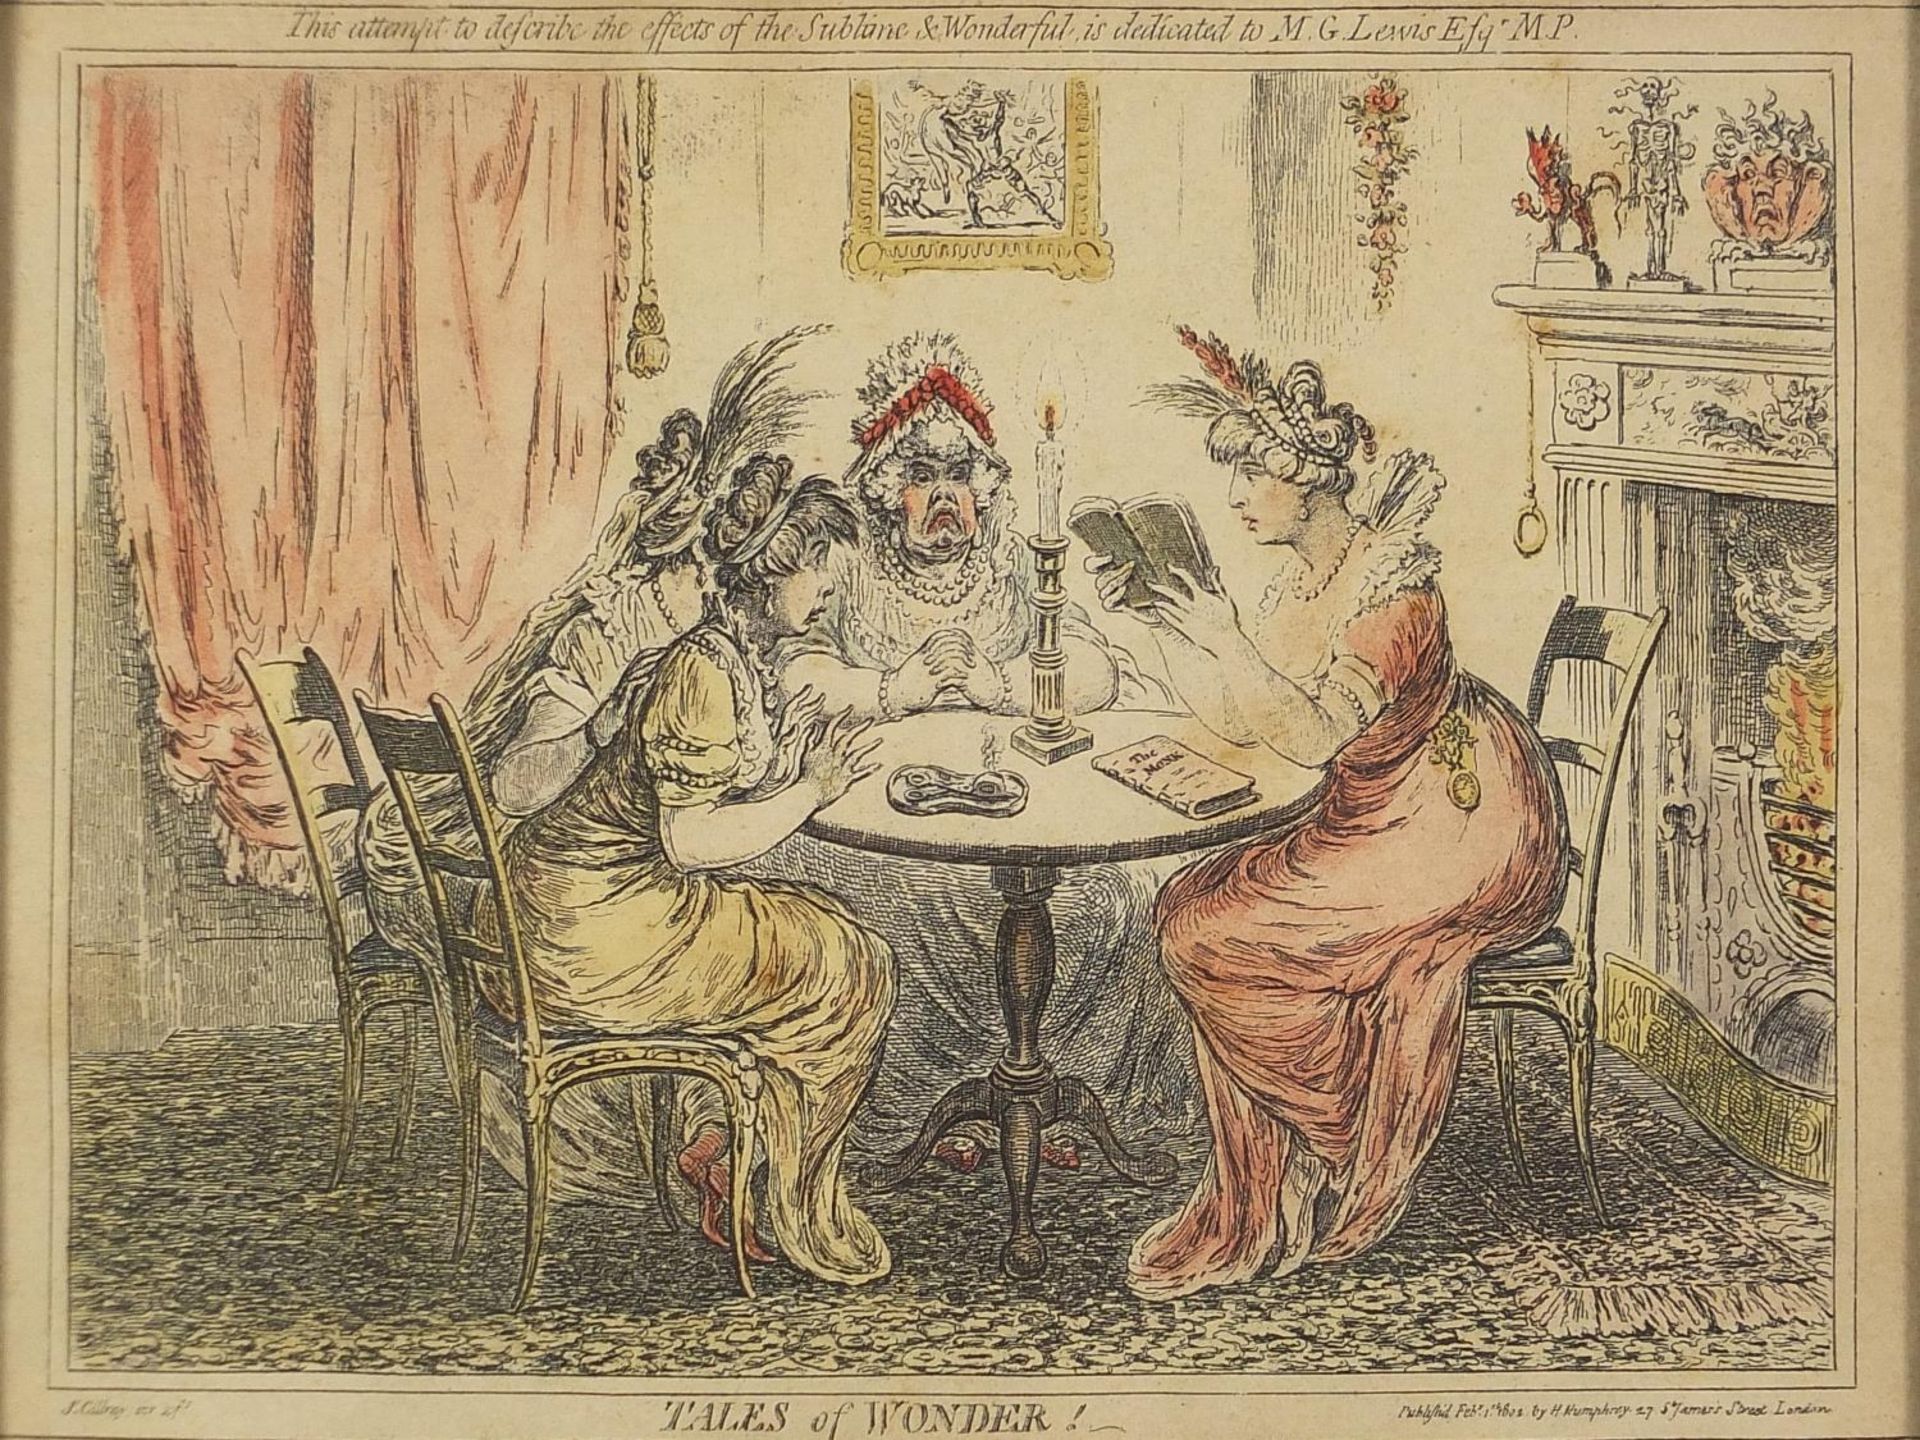 After James Gillray - Tales of Wonder, early 19th century satirical print in colour, published